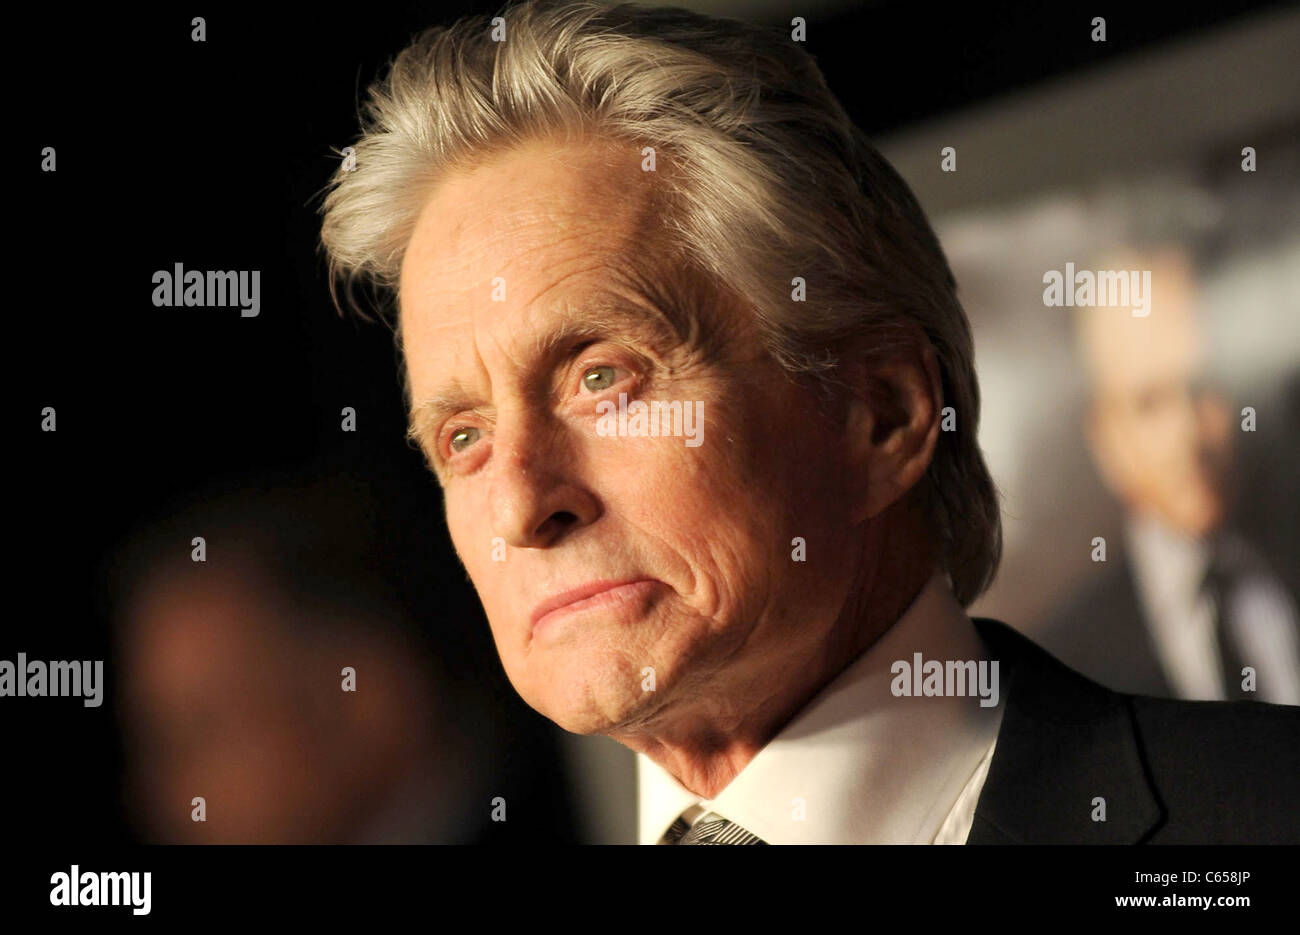 Michael Douglas at arrivals for Wall Street 2: Money Never Sleeps Premiere, The Ziegfeld Theatre, New York, NY September 20, 2010. Photo By: Kristin Callahan/Everett Collection Stock Photo